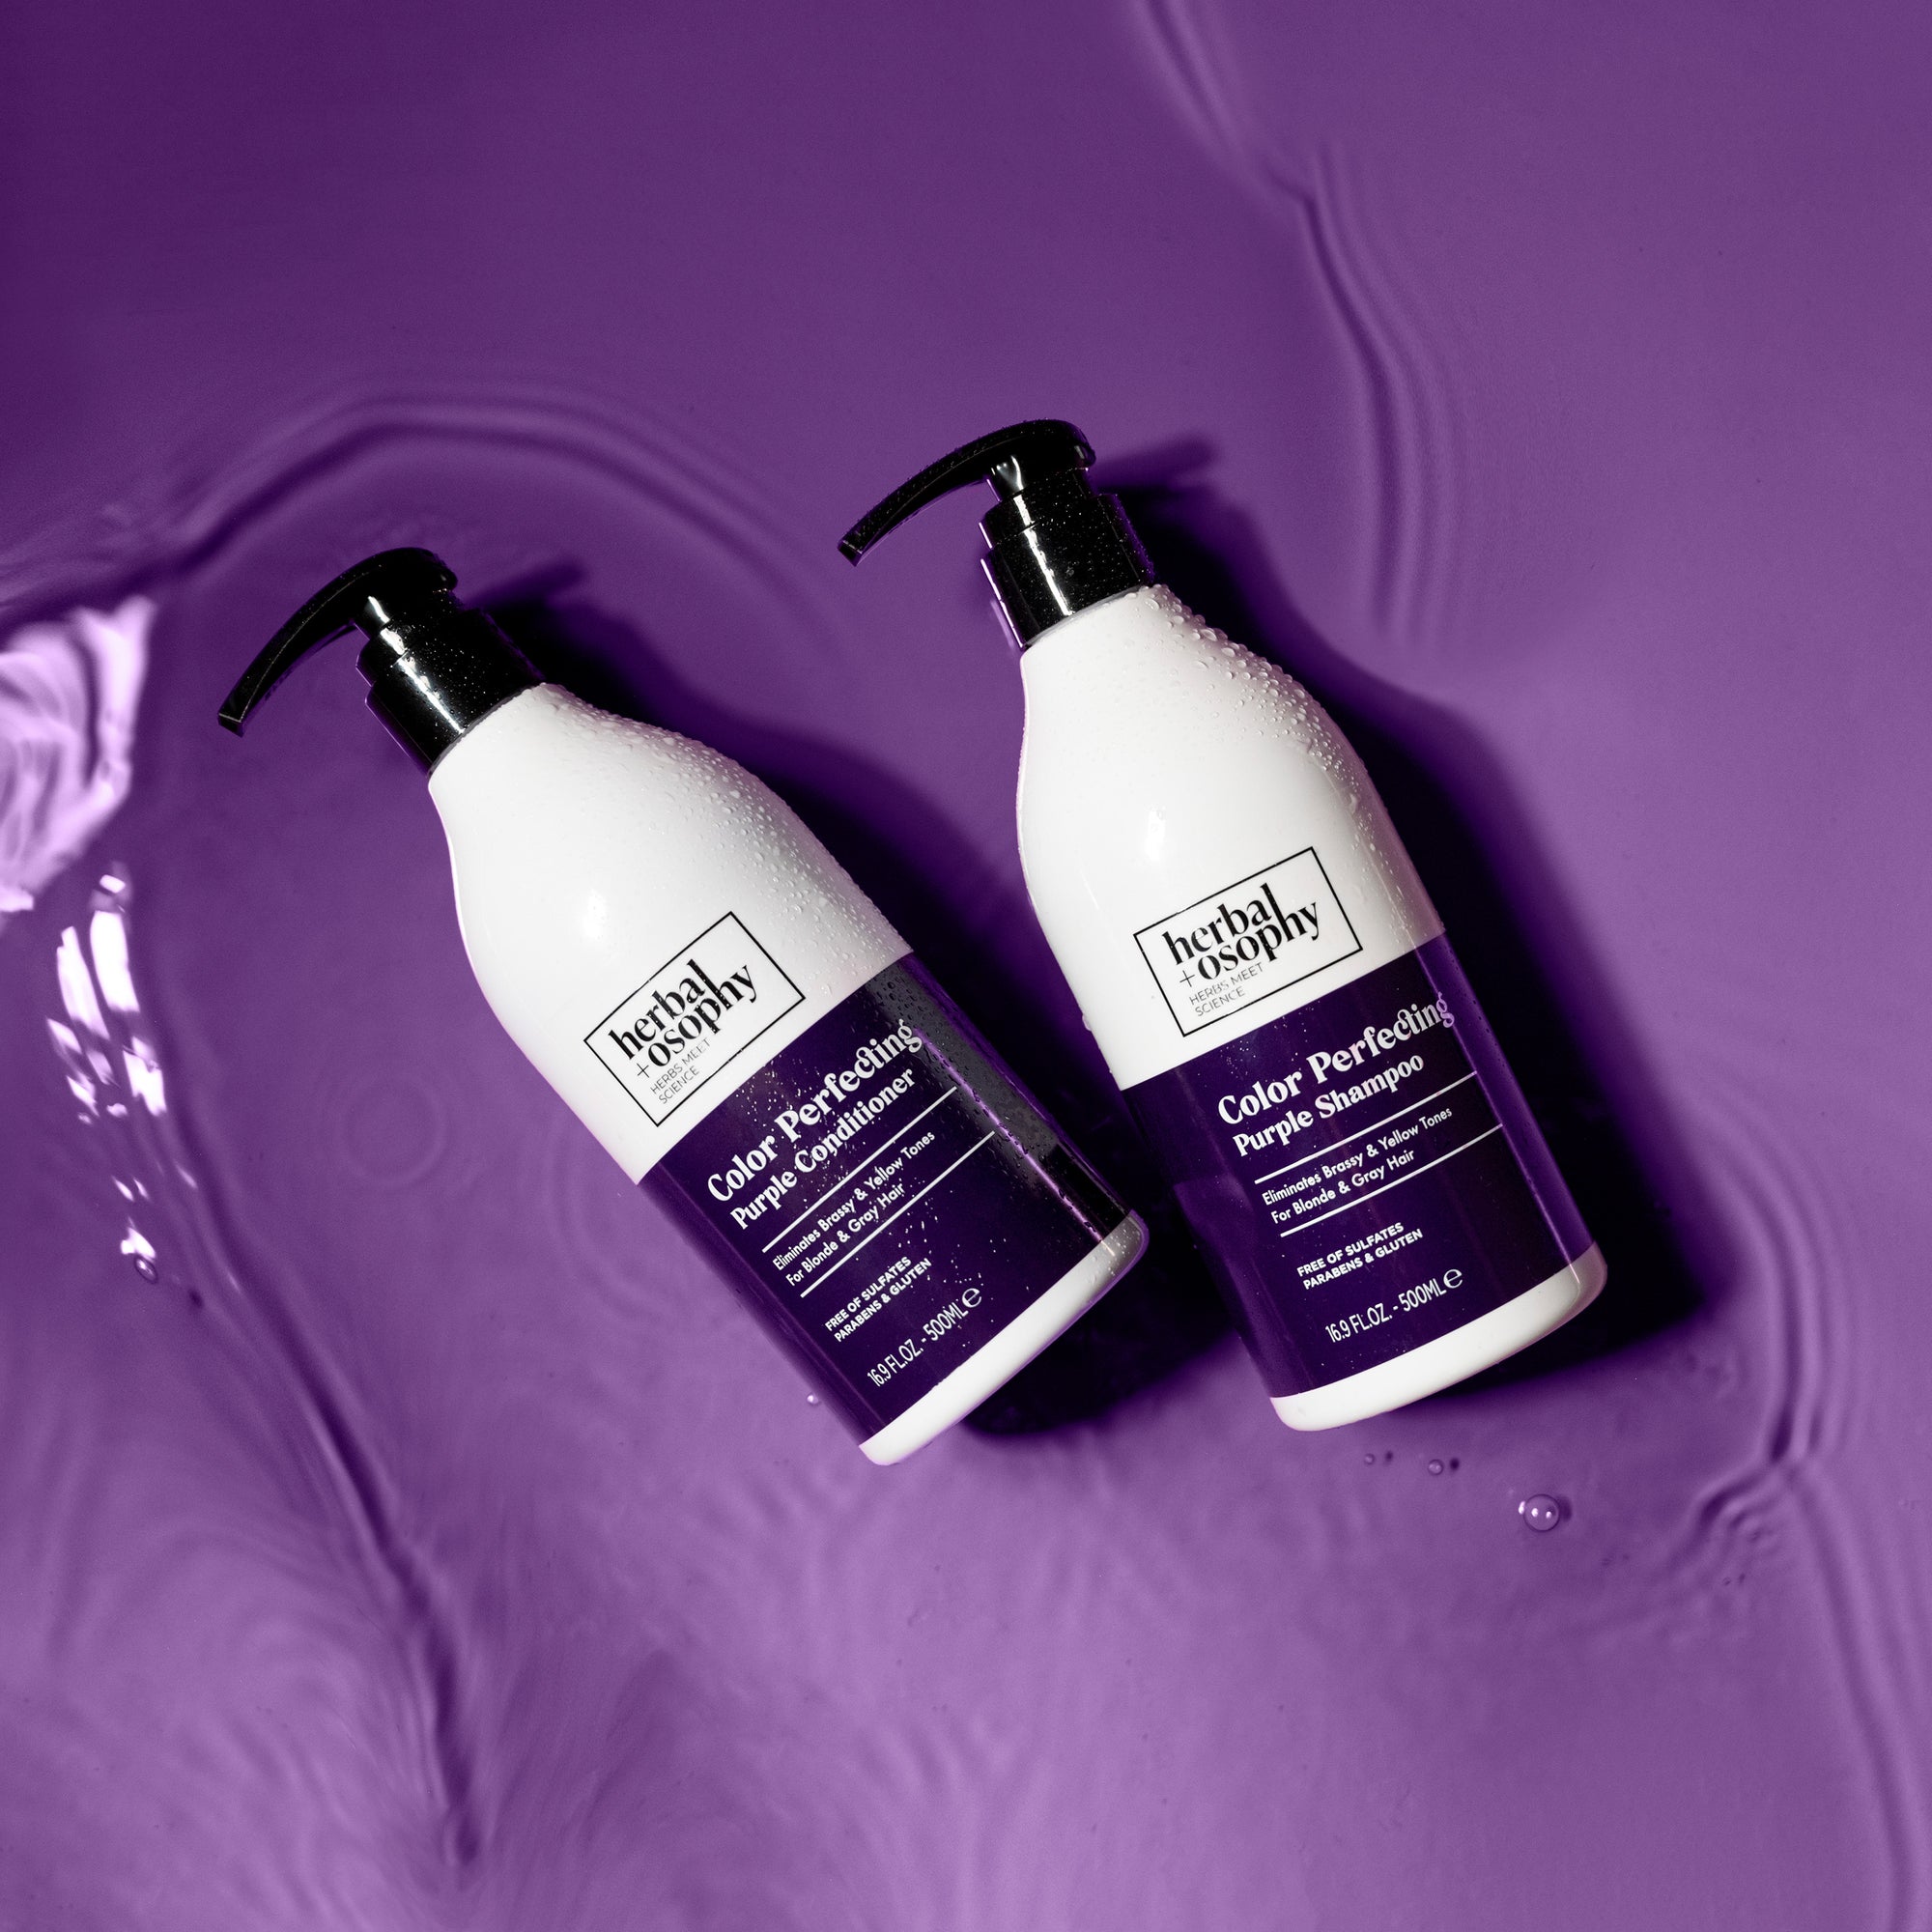 Herbalosophy Color Perfecting Purple Shampoo and Conditioner bottles in rippling purple water